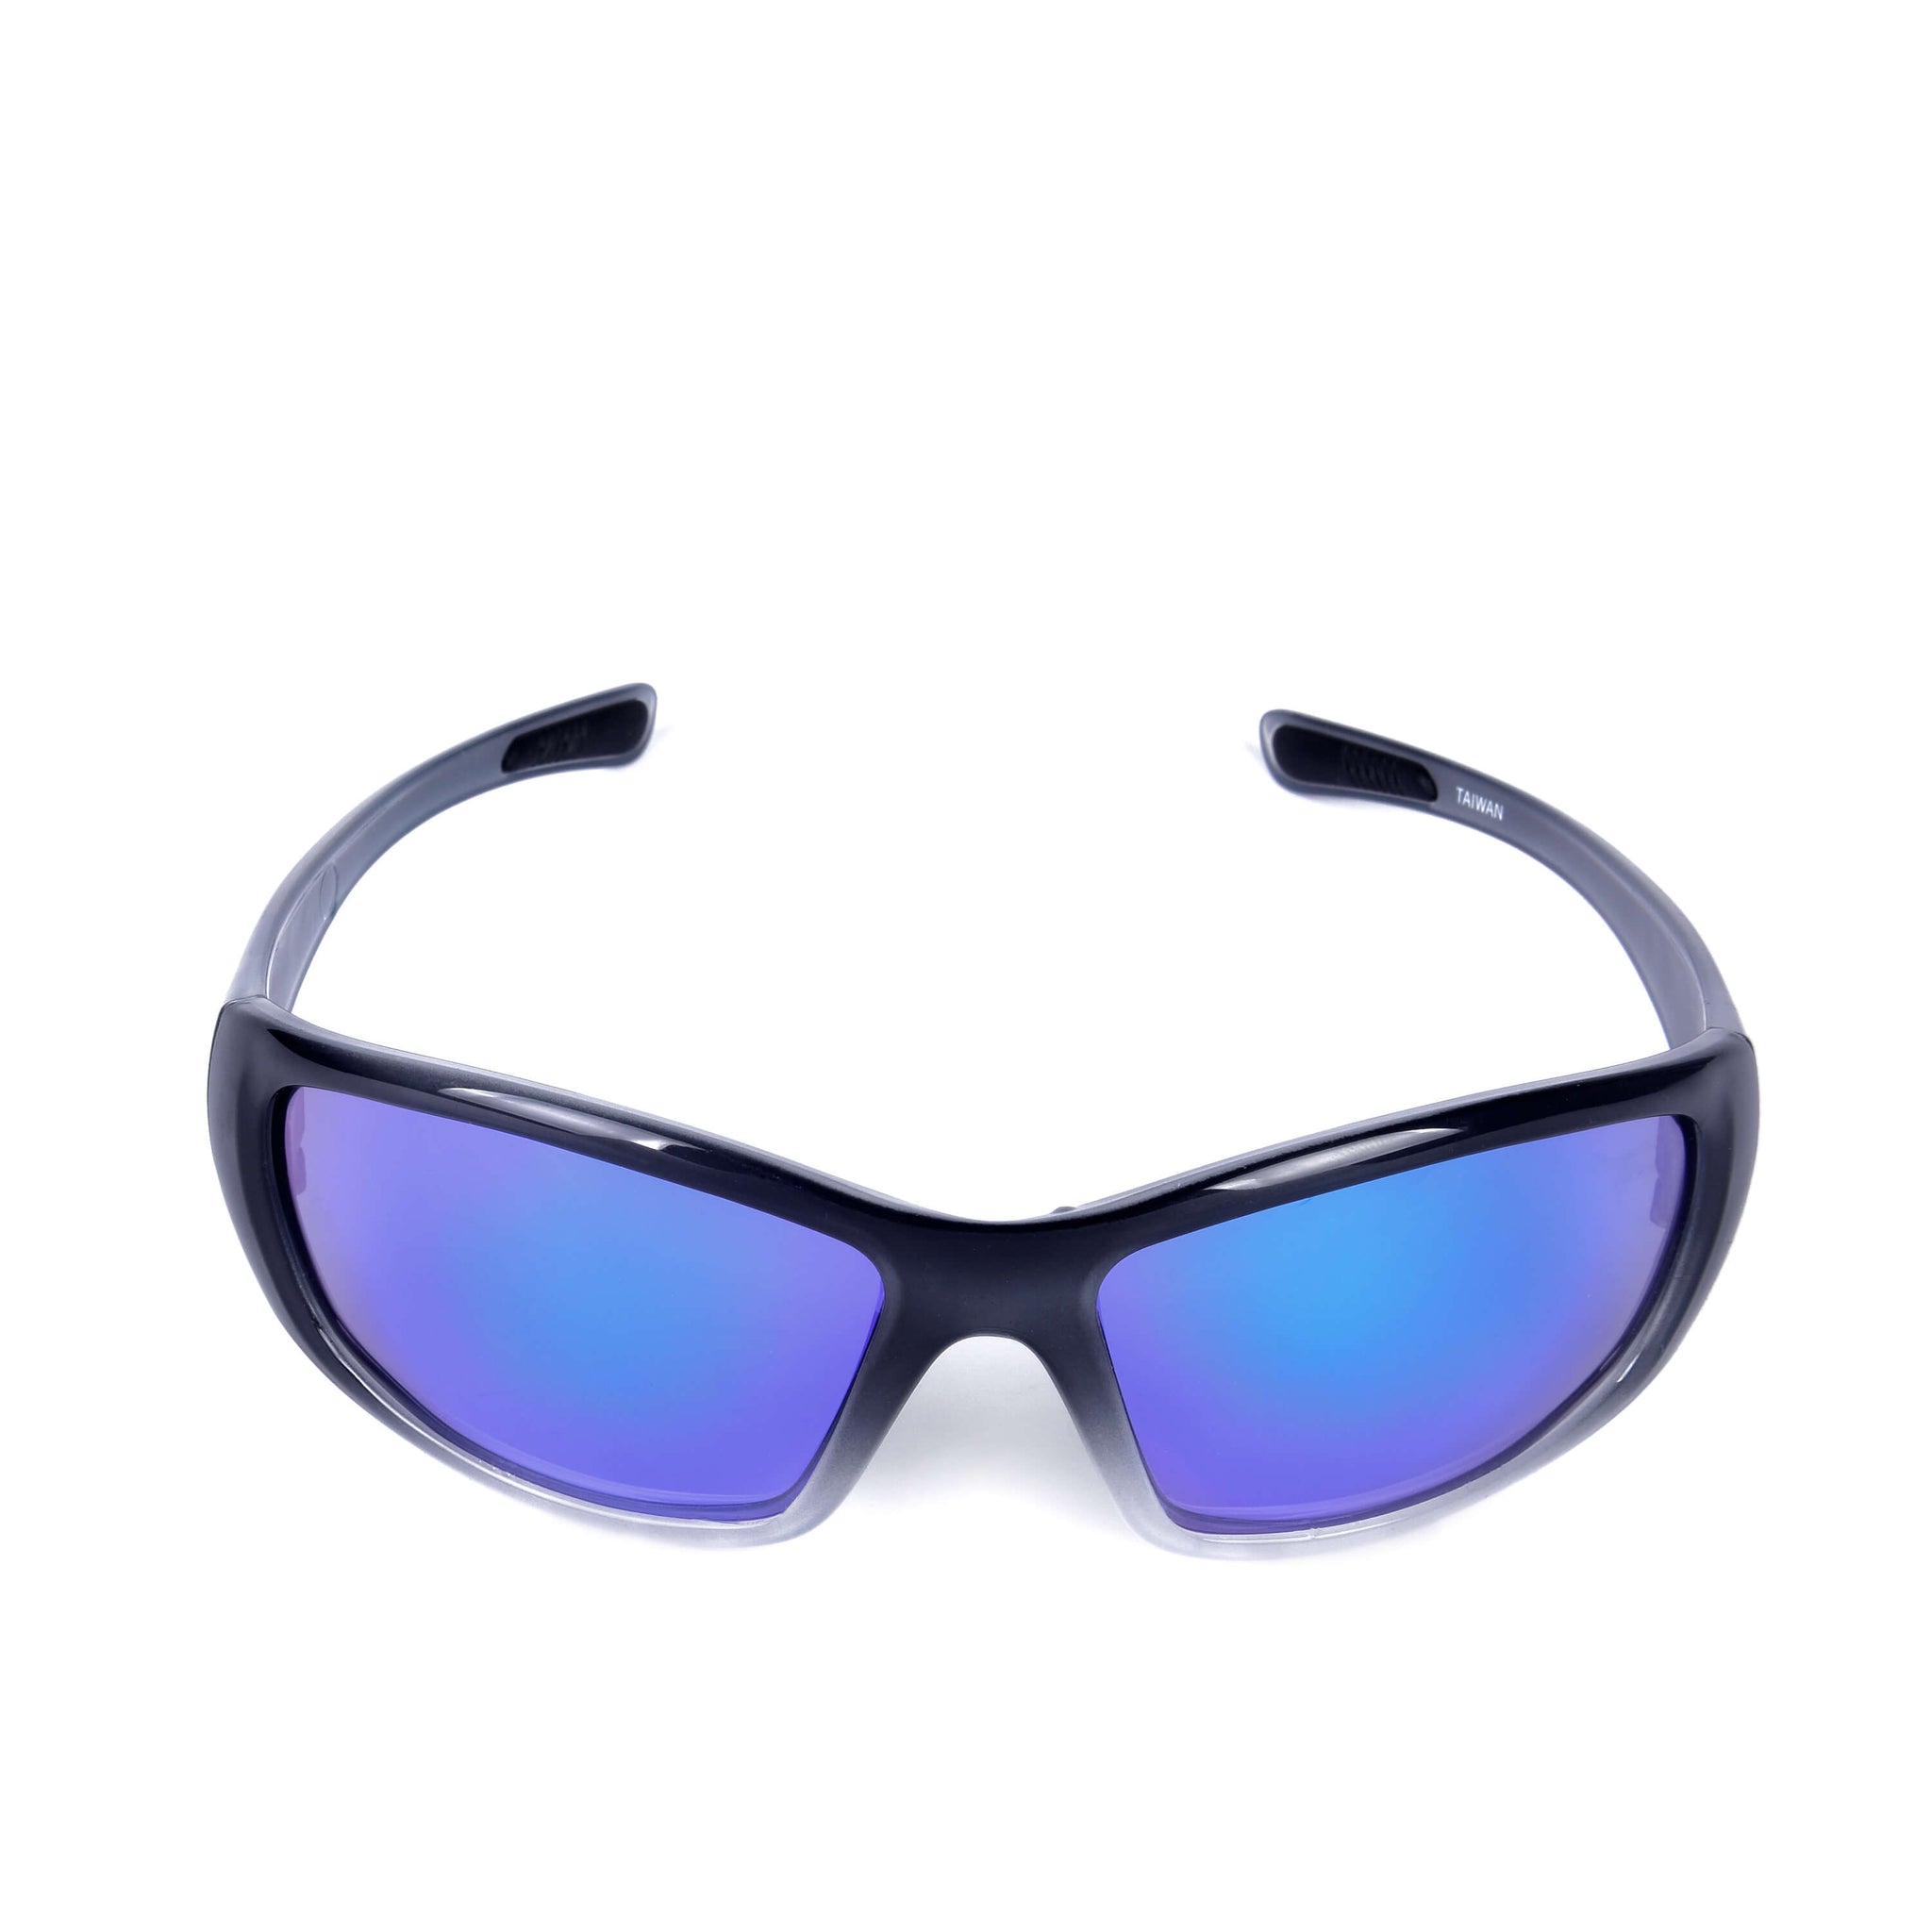 Hornet Watersports Floating Sunglasses with Polarized Lenses- Ideal for Fishing Boating Kayaking Paddling and More (Cool Grey Blue)